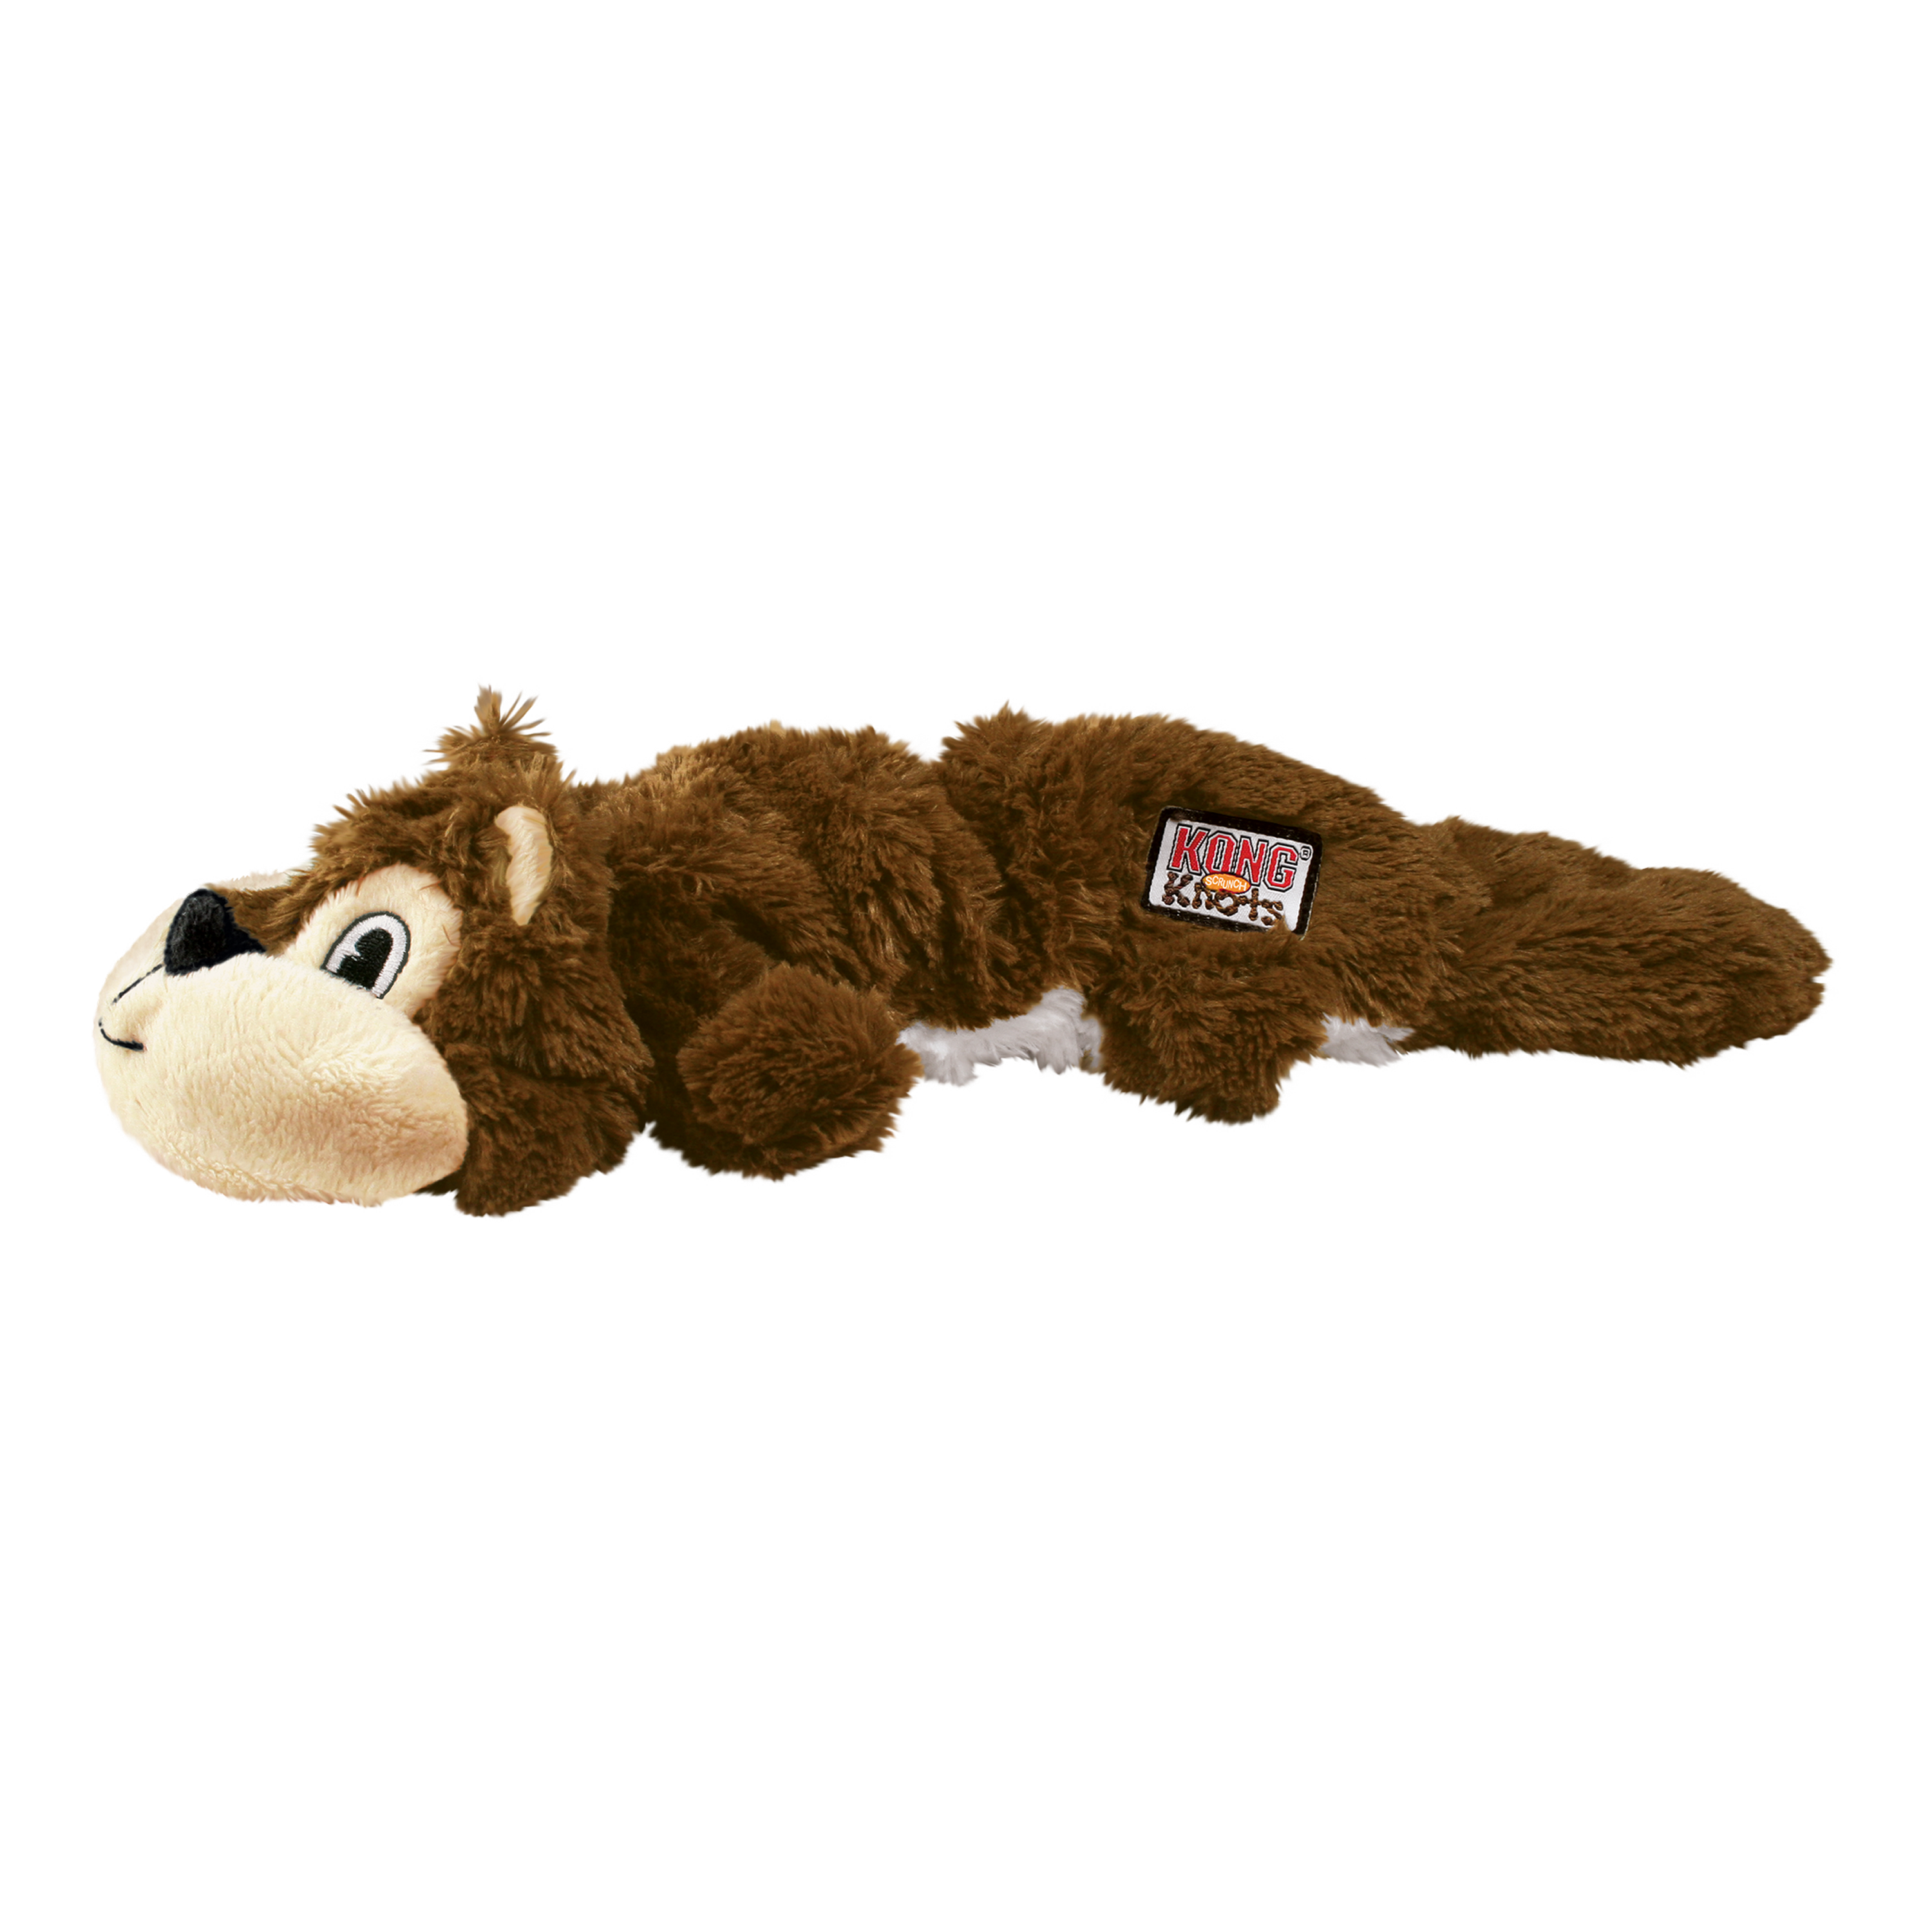 Scrunch Knots Squirrel offpack product image